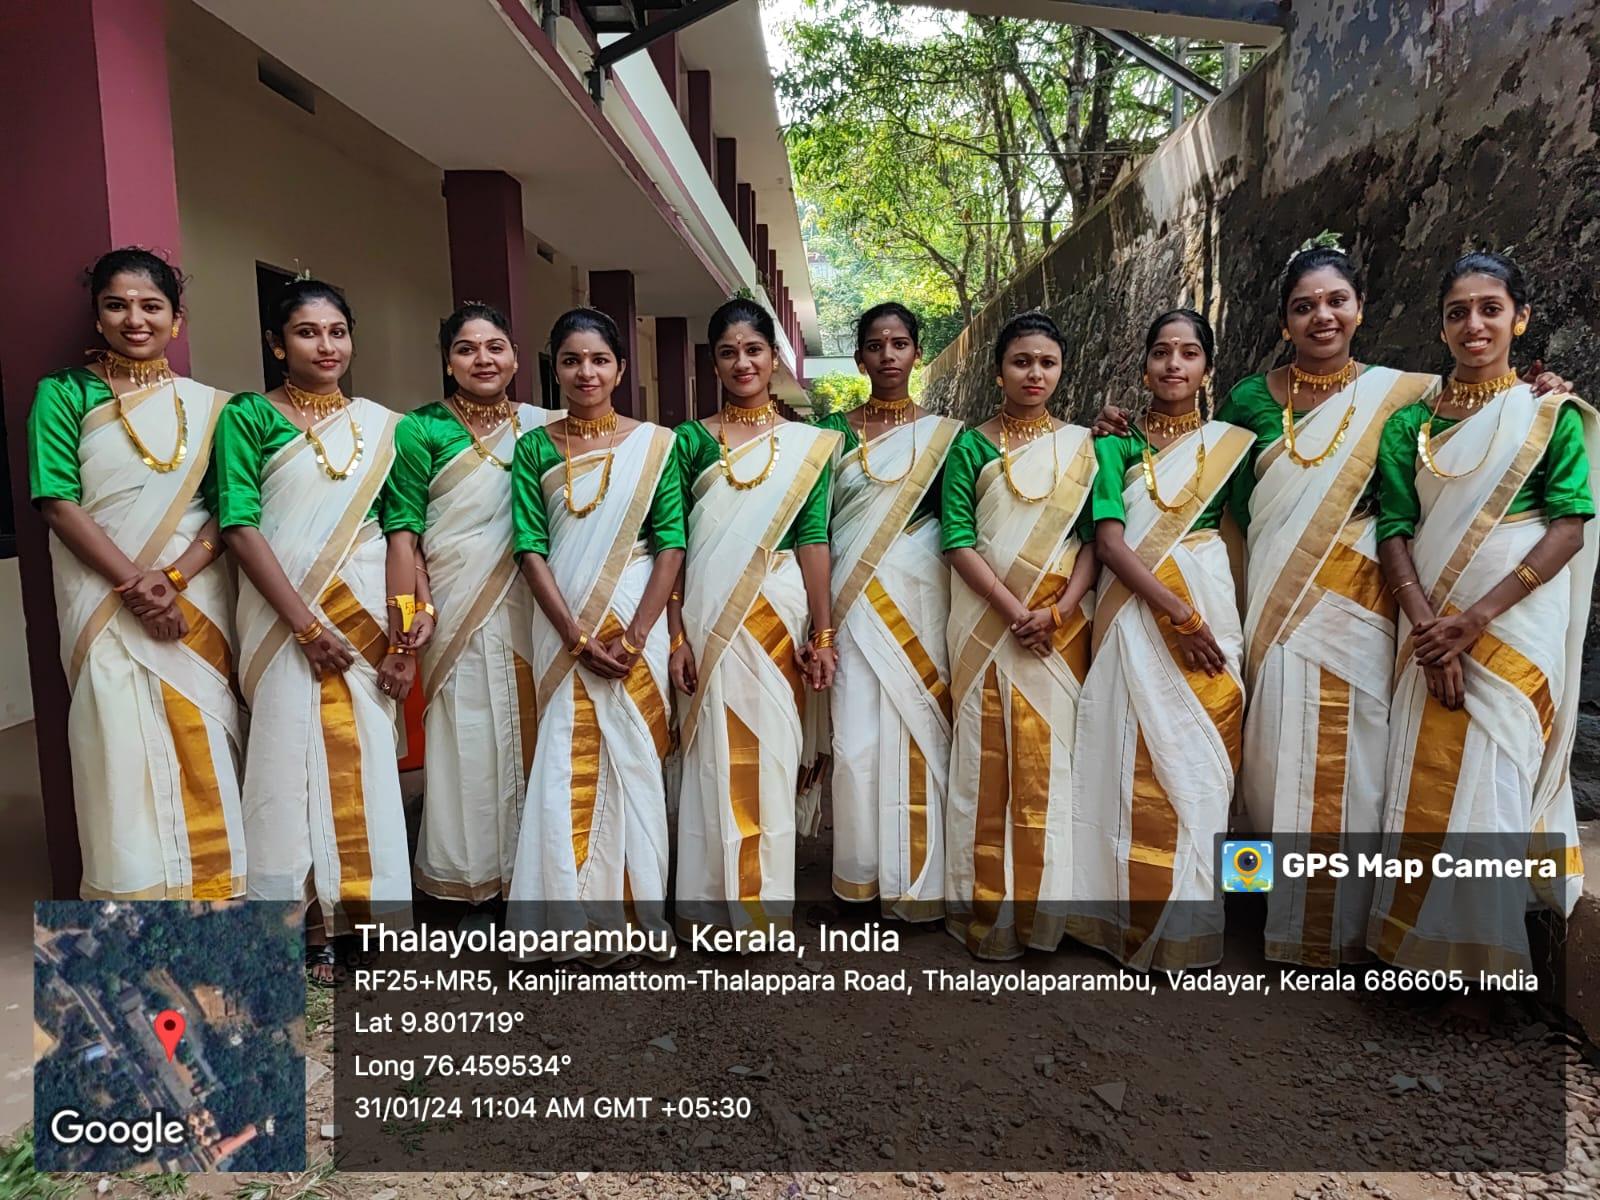 A group of women in traditional attire

Description automatically generated